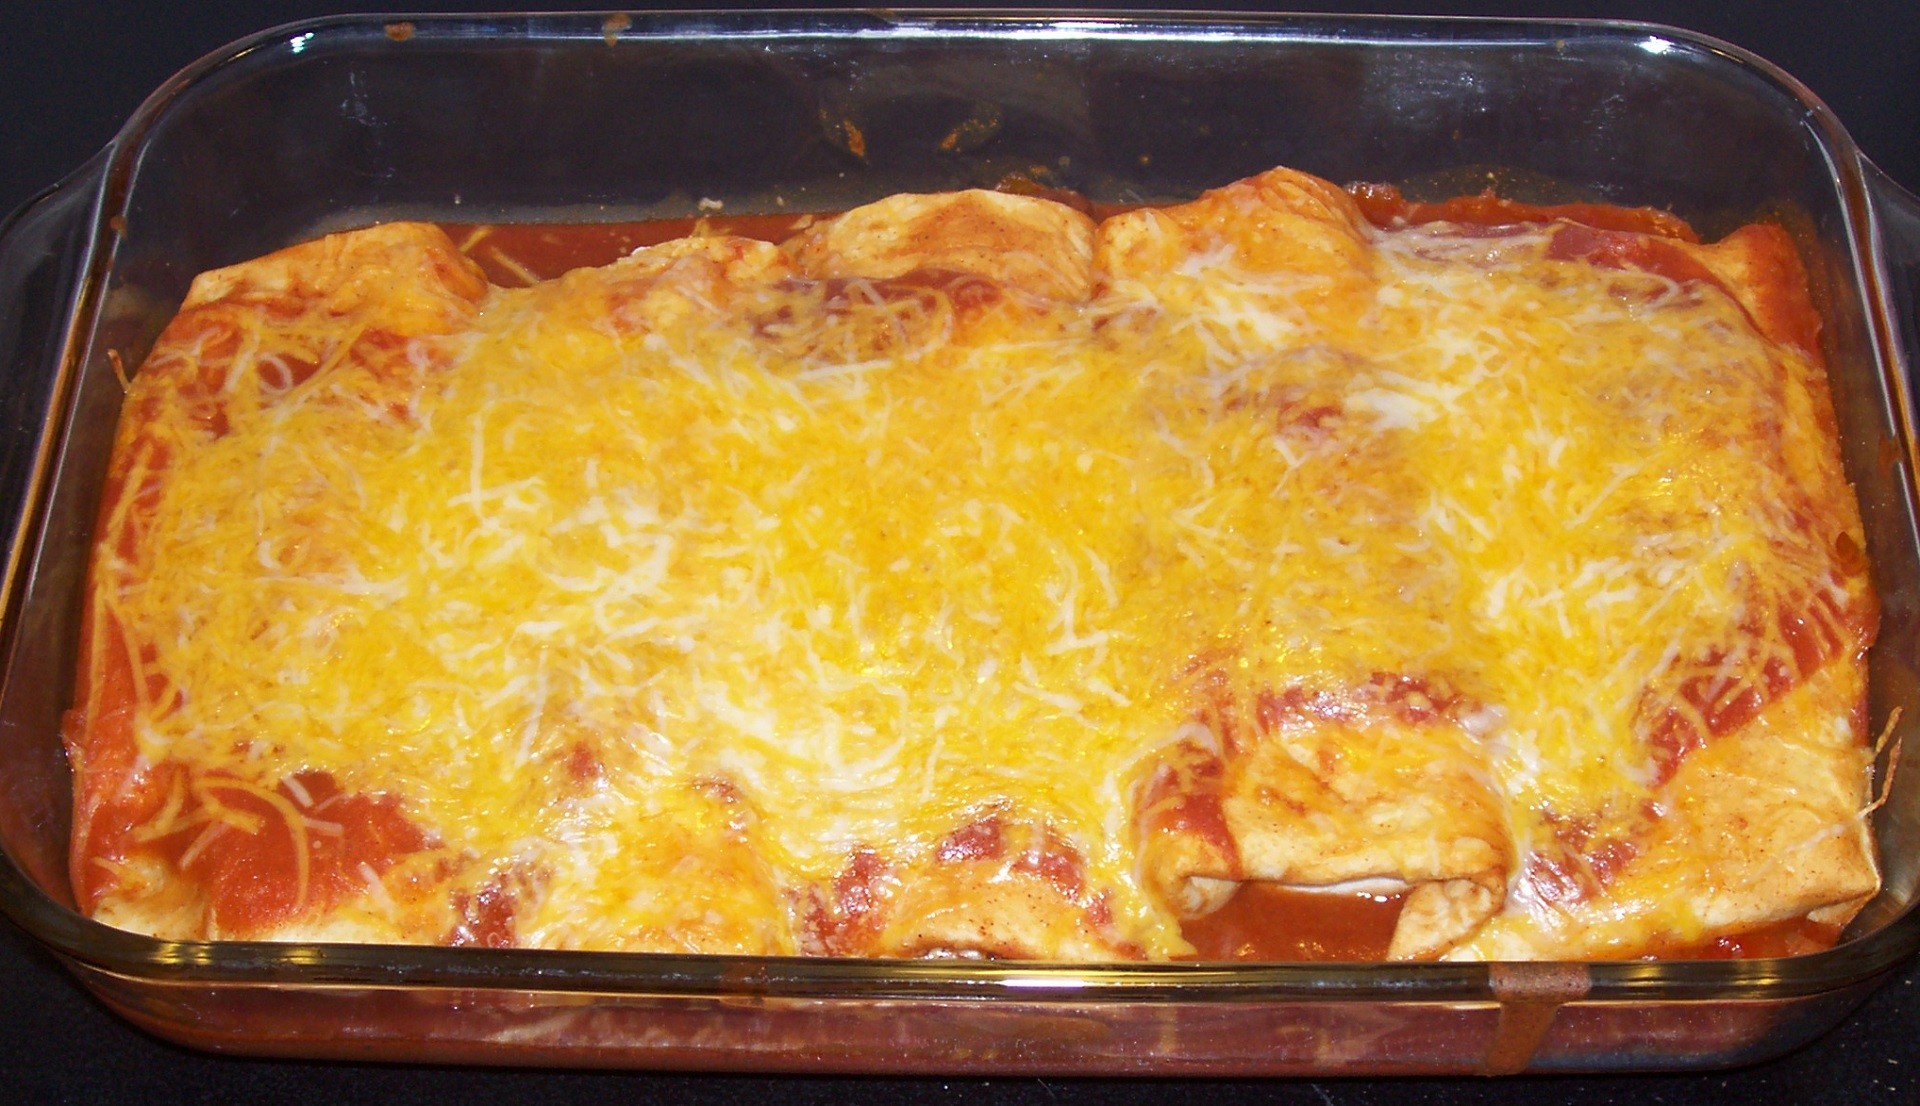 Awesome White Cheese and Chocolate Enchiladas